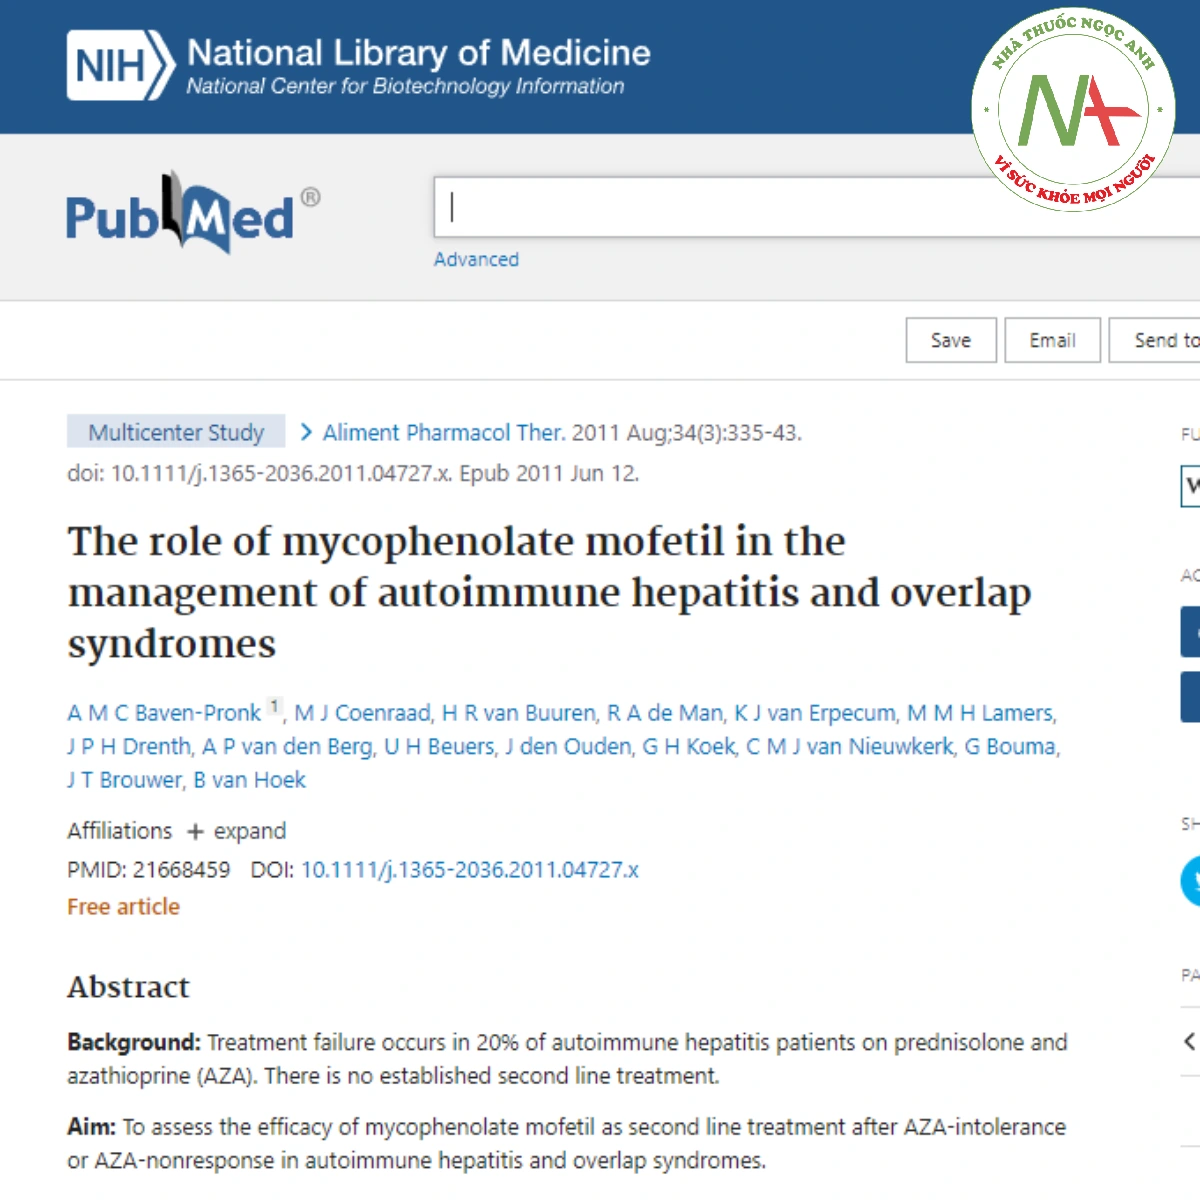 The role of mycophenolate mofetil in the management of autoimmune hepatitis and overlap syndromes